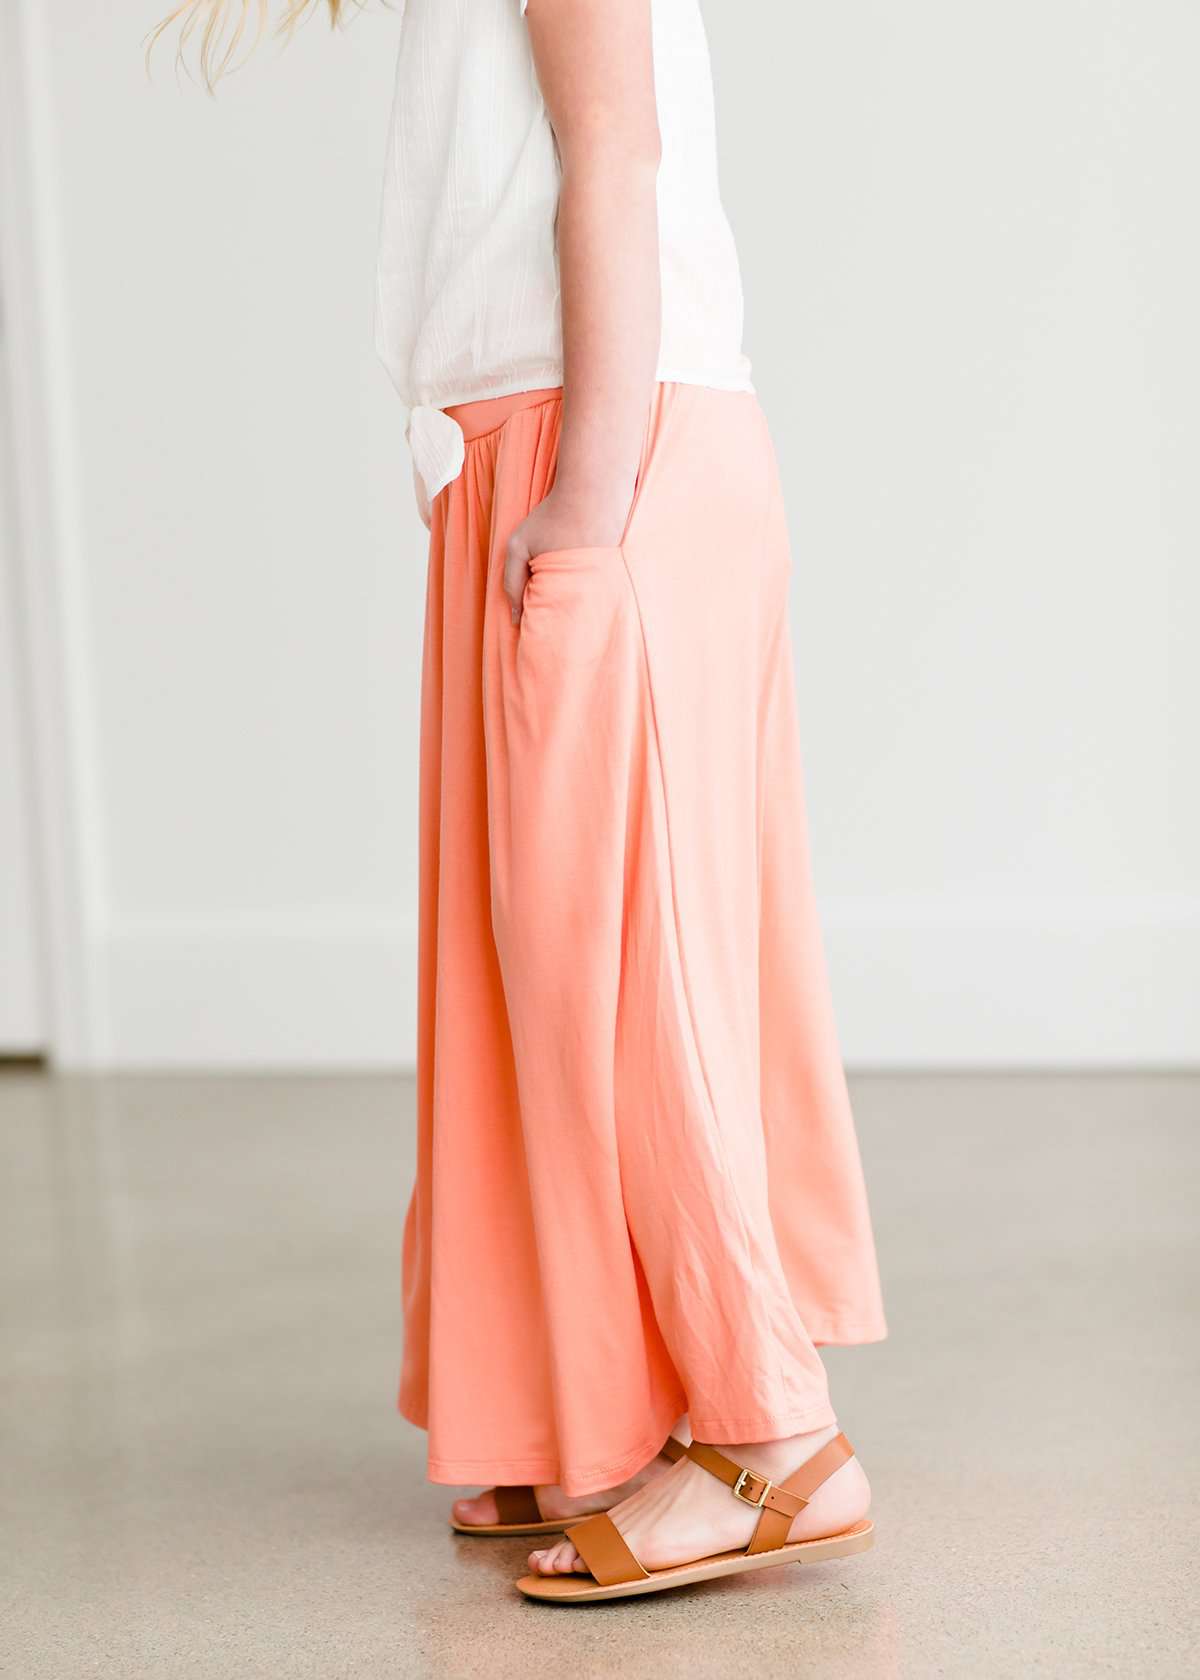 Stretchy Swing Maxi Skirt-FINAL SALE Skirts